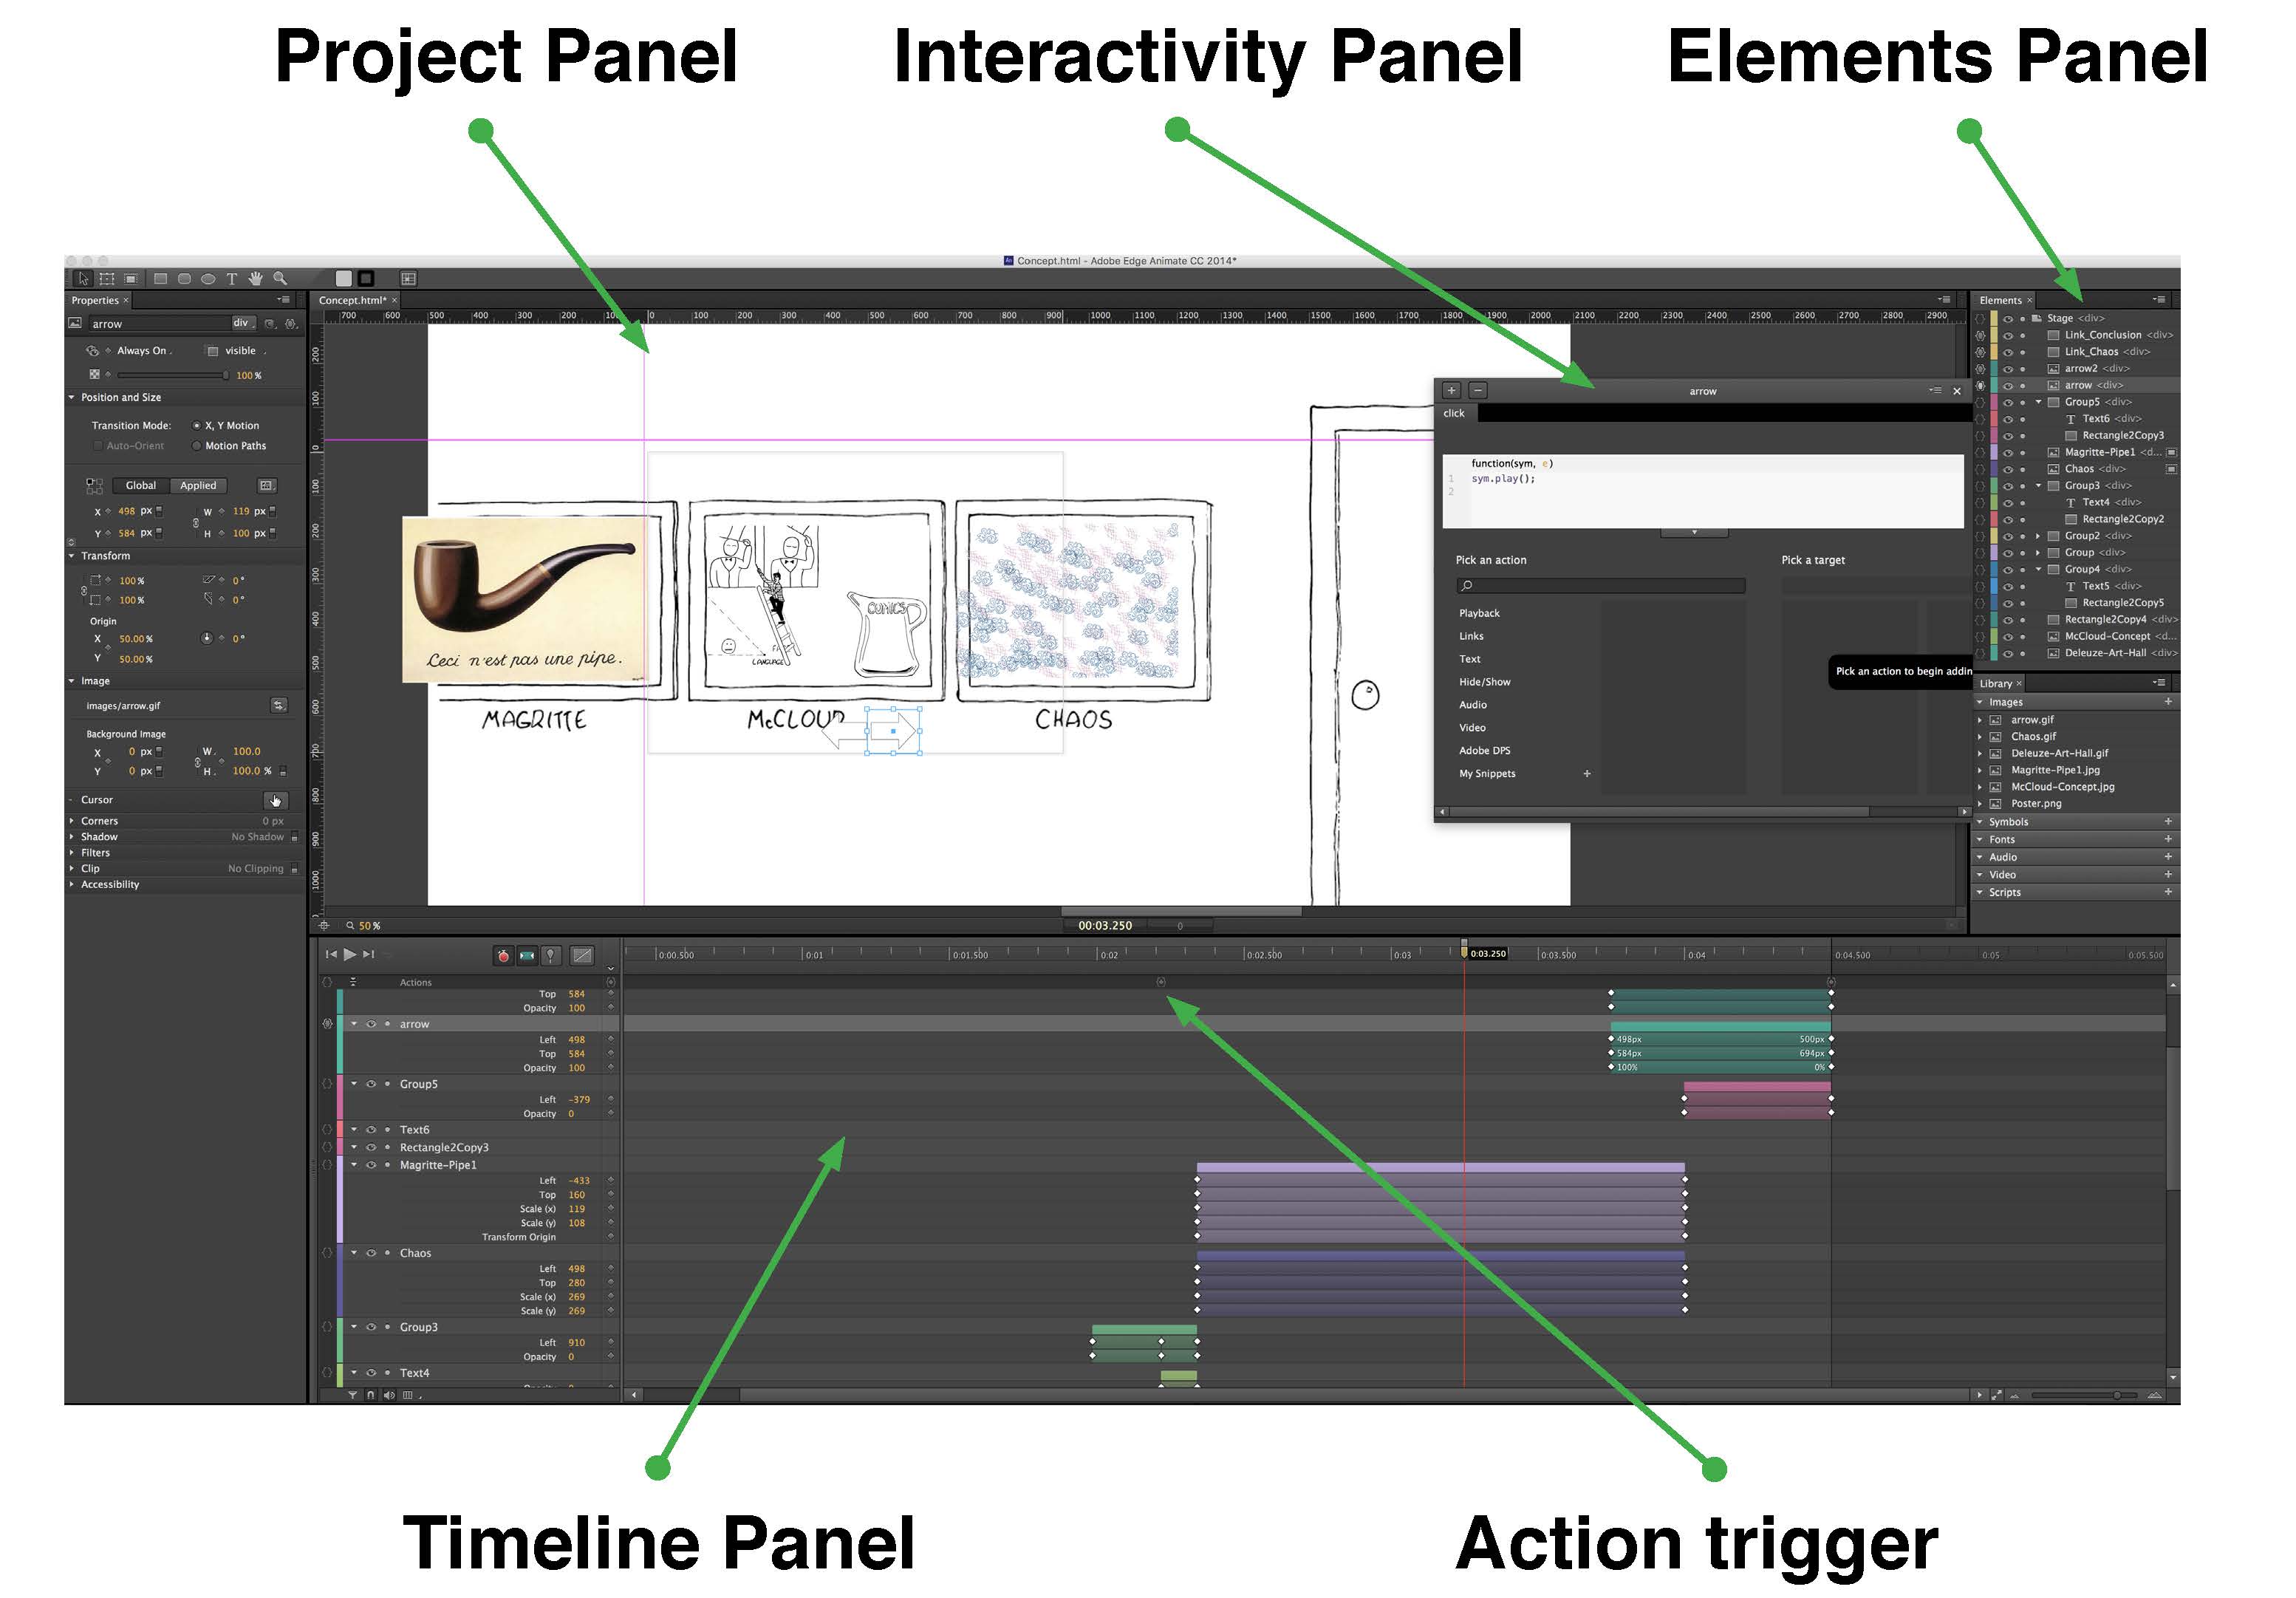 A screenshot from Adobe Edge Animate, labeled with different elements, including a project panel and an interactivity panel